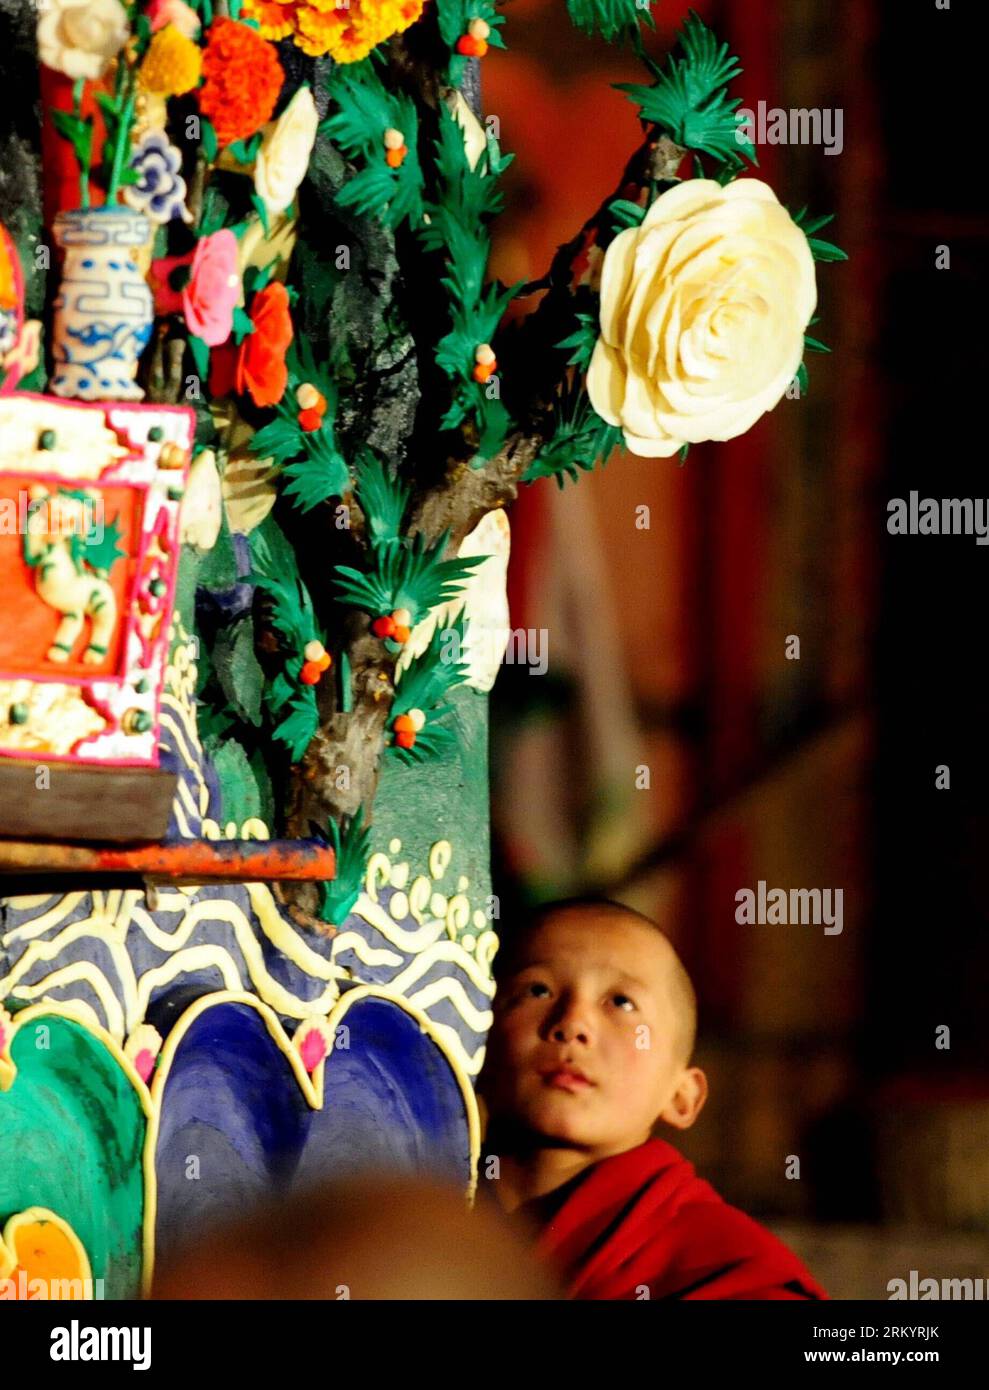 Bildnummer: 59266485  Datum: 24.02.2013  Copyright: imago/Xinhua GANNAN, A young Buddhist monk views yak butter sculptures displayed at the Labrang Monastery in Xiahe County of Gannan Tibetan Autonomous Prefecture, northwest China s Gansu Province, Feb. 24, 2013. An annual yak butter sculpture show was held here on Sunday, the Chinese Lantern Festival, as a means to pray for good fortune and harvest. The Labrang Monastery is among the six great monasteries of the Geluk school of Tibetan Buddhism. (Xinhua/Zhang Meng) (lmm) CHINA-GANSU-LABRANG MONASTERY-LANTERN FESTIVAL (CN) PUBLICATIONxNOTxINxC Stock Photo